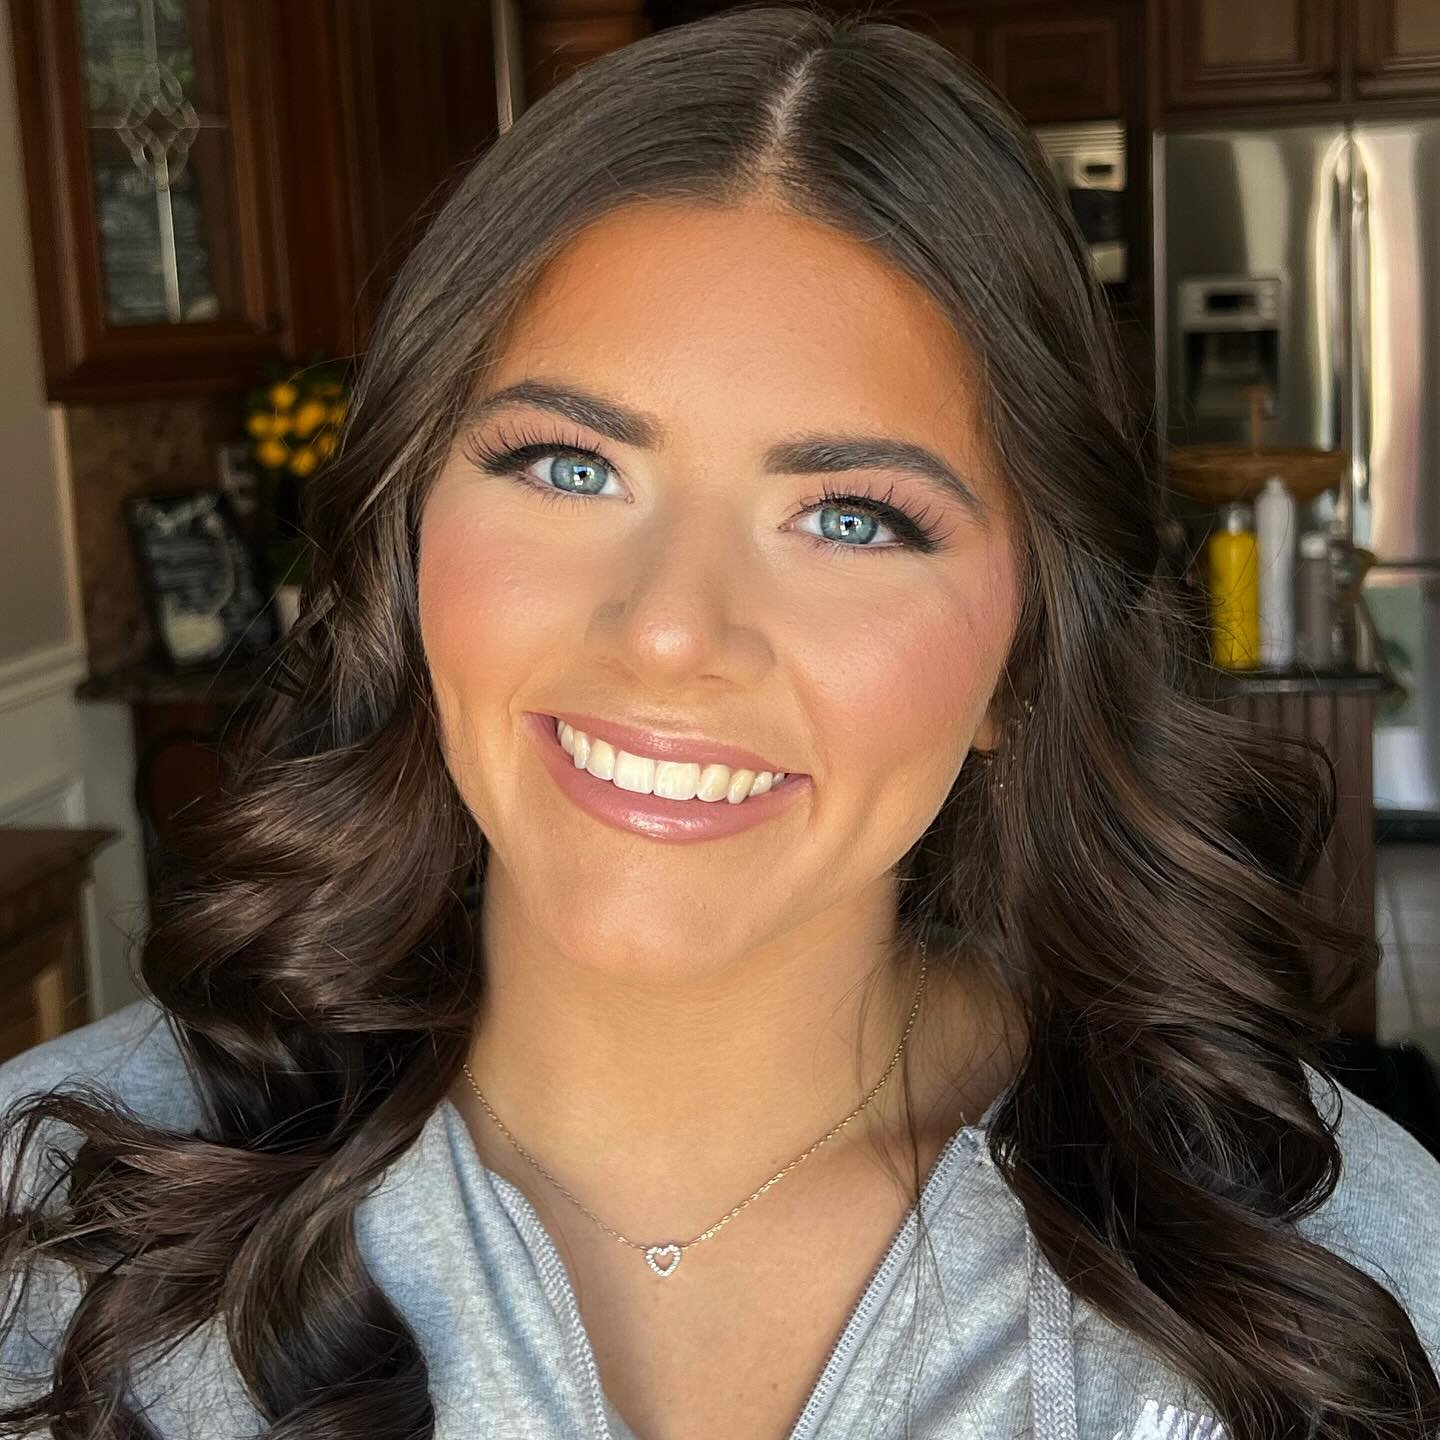 Daniella is such a beauty! She&rsquo;s ready for her Sorority Formal 🩷 @daniellagallo_ 

For all inquires or bookings, please email me directly or fill out a Contact Form on my website! 💌

#newjerseymakeupartist #njmakeupartist #statenislandmakeupa